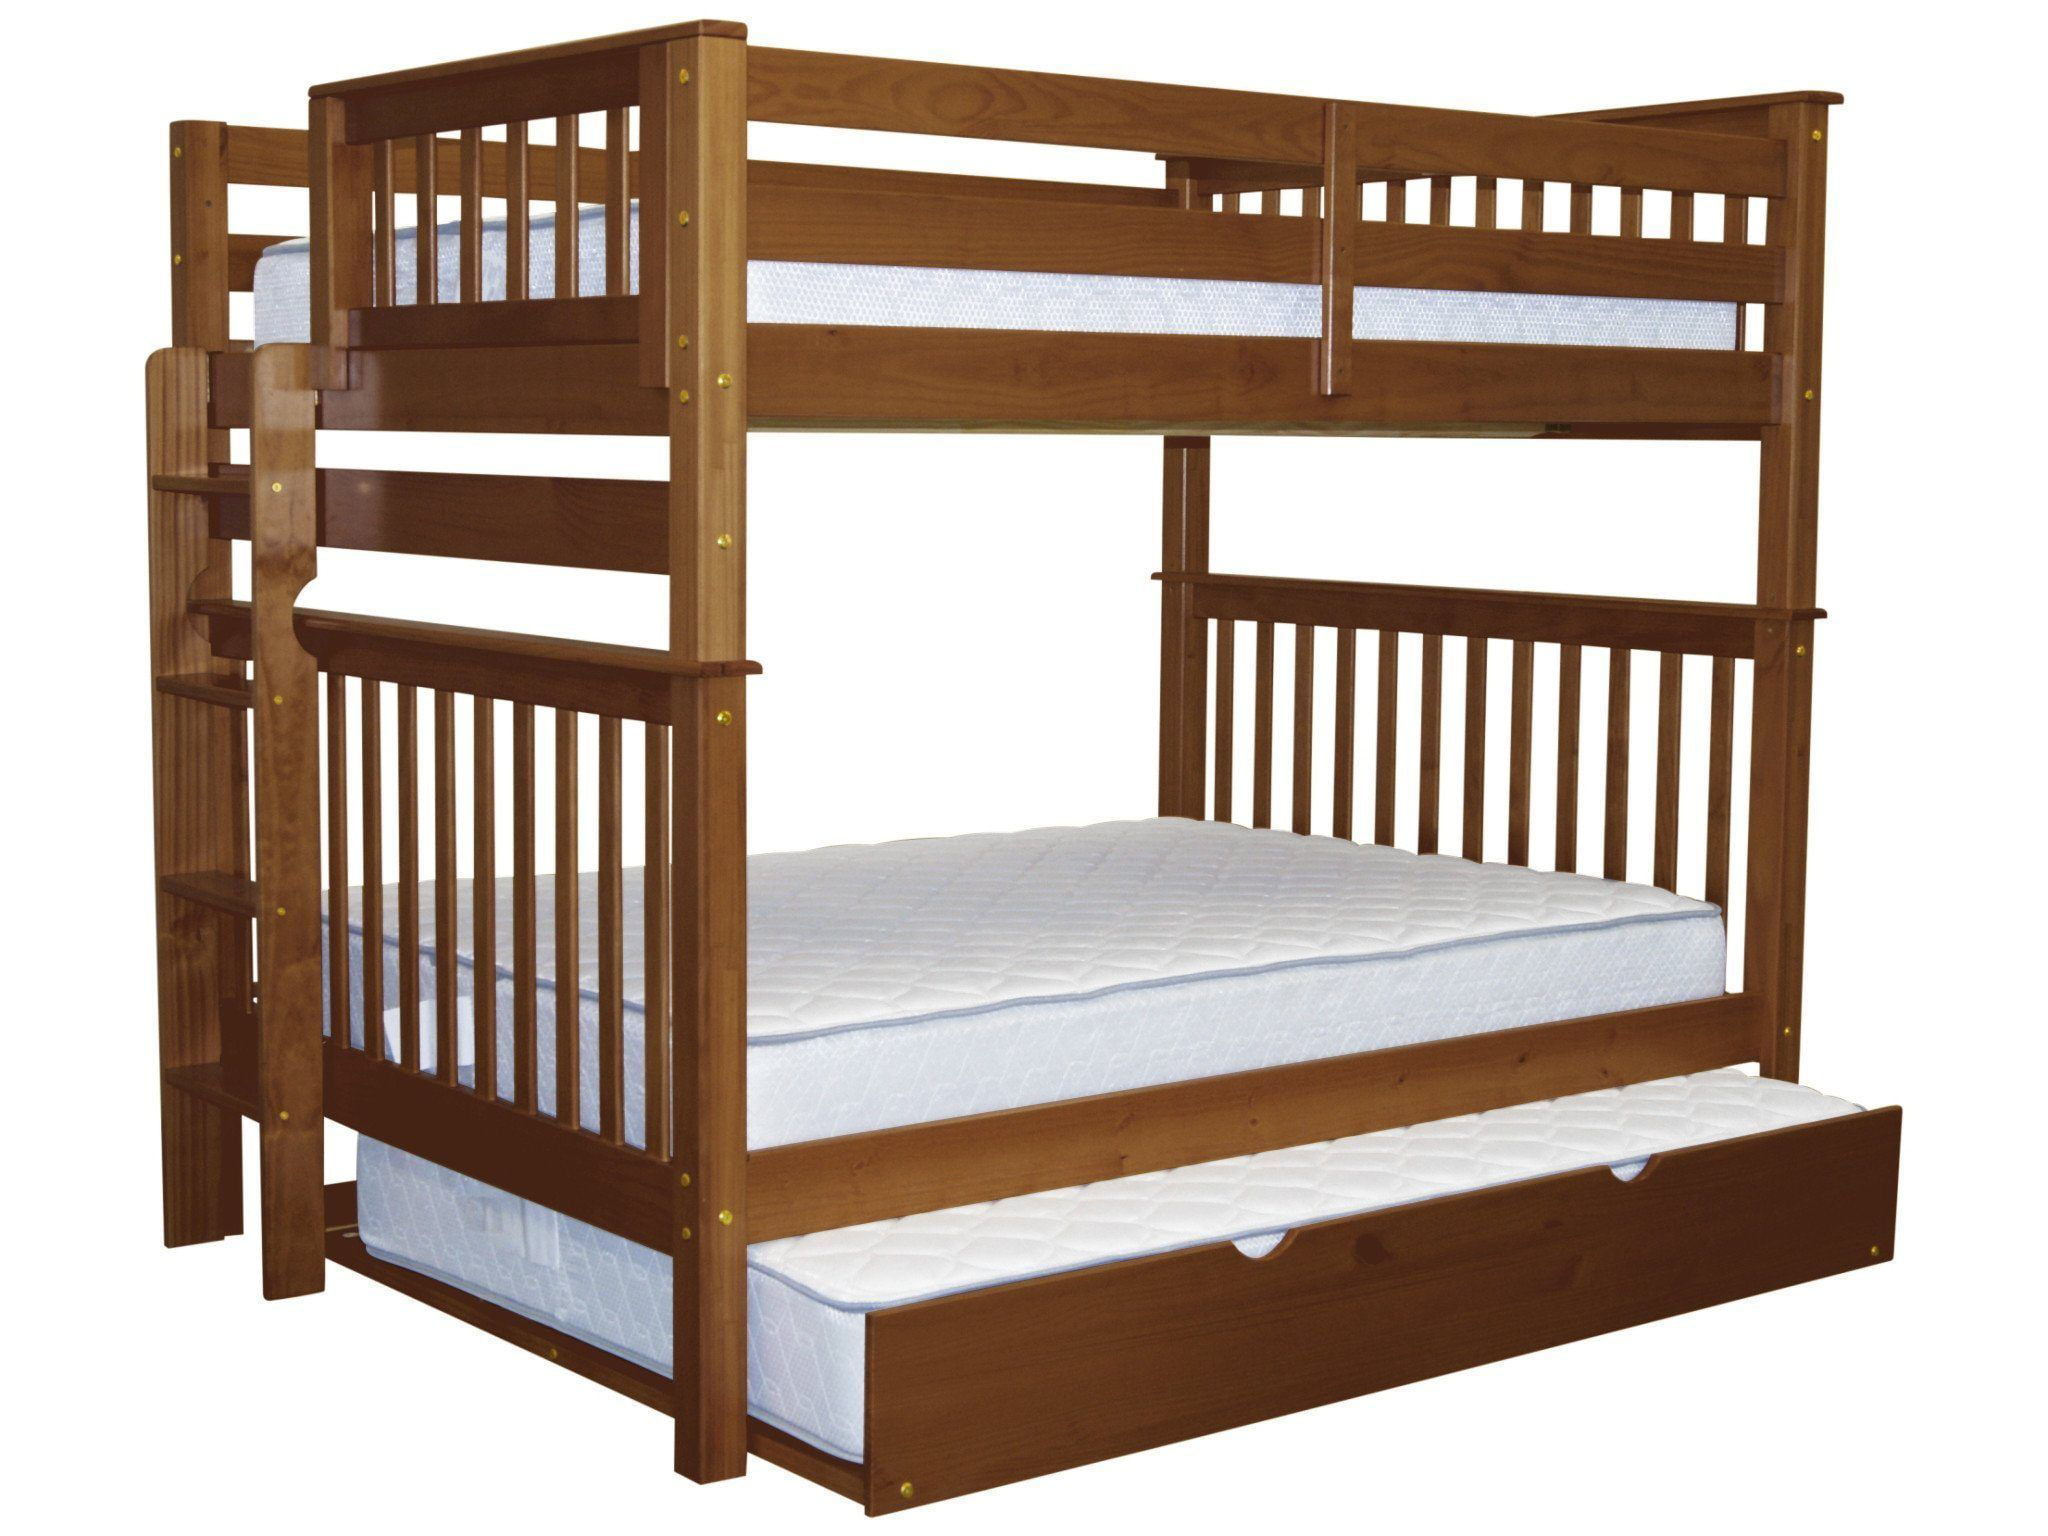 Bedz King Bunk Beds Full Over, King Over King Bunk Bed